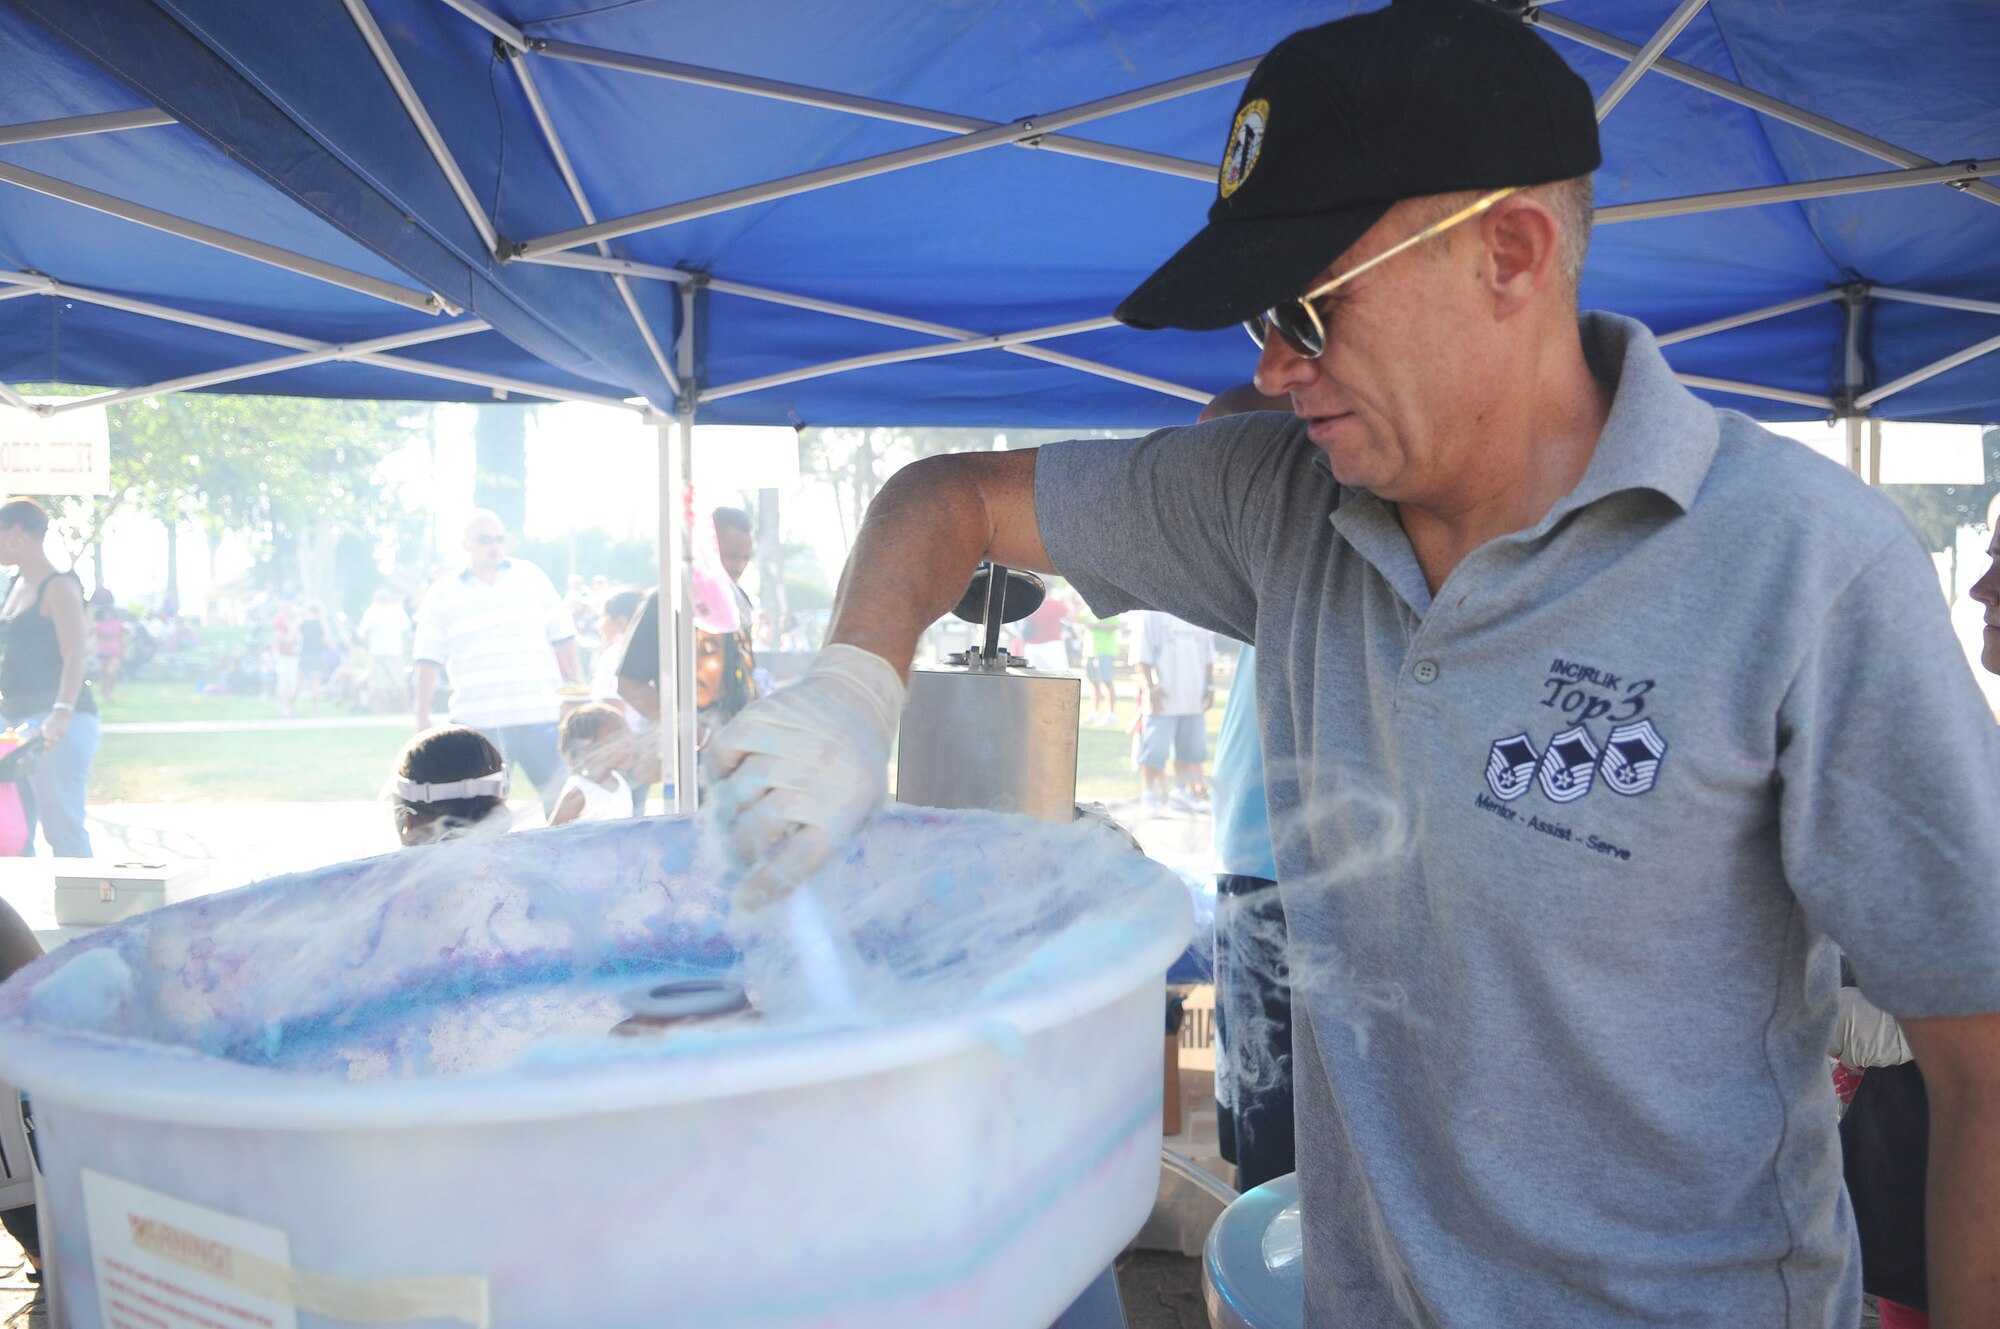 Senior Master Sgt. Johnny Jesse, the 39th Operations Squadron’s “Cotton Candy King,” prepares an order of cotton candy during Freedom Fest July 4 at Incirlik Air Base, Turkey. Sergeant Jesse volunteered at the Air Force Sergeant’s Association concession booth. Freedom Fest was the base’s official Fourth of July celebration and included events such as live bands, concession stands, arts and crafts, a petting zoo and a fireworks show. (U.S. Air Force photo/Senior Airman Alex Martinez)